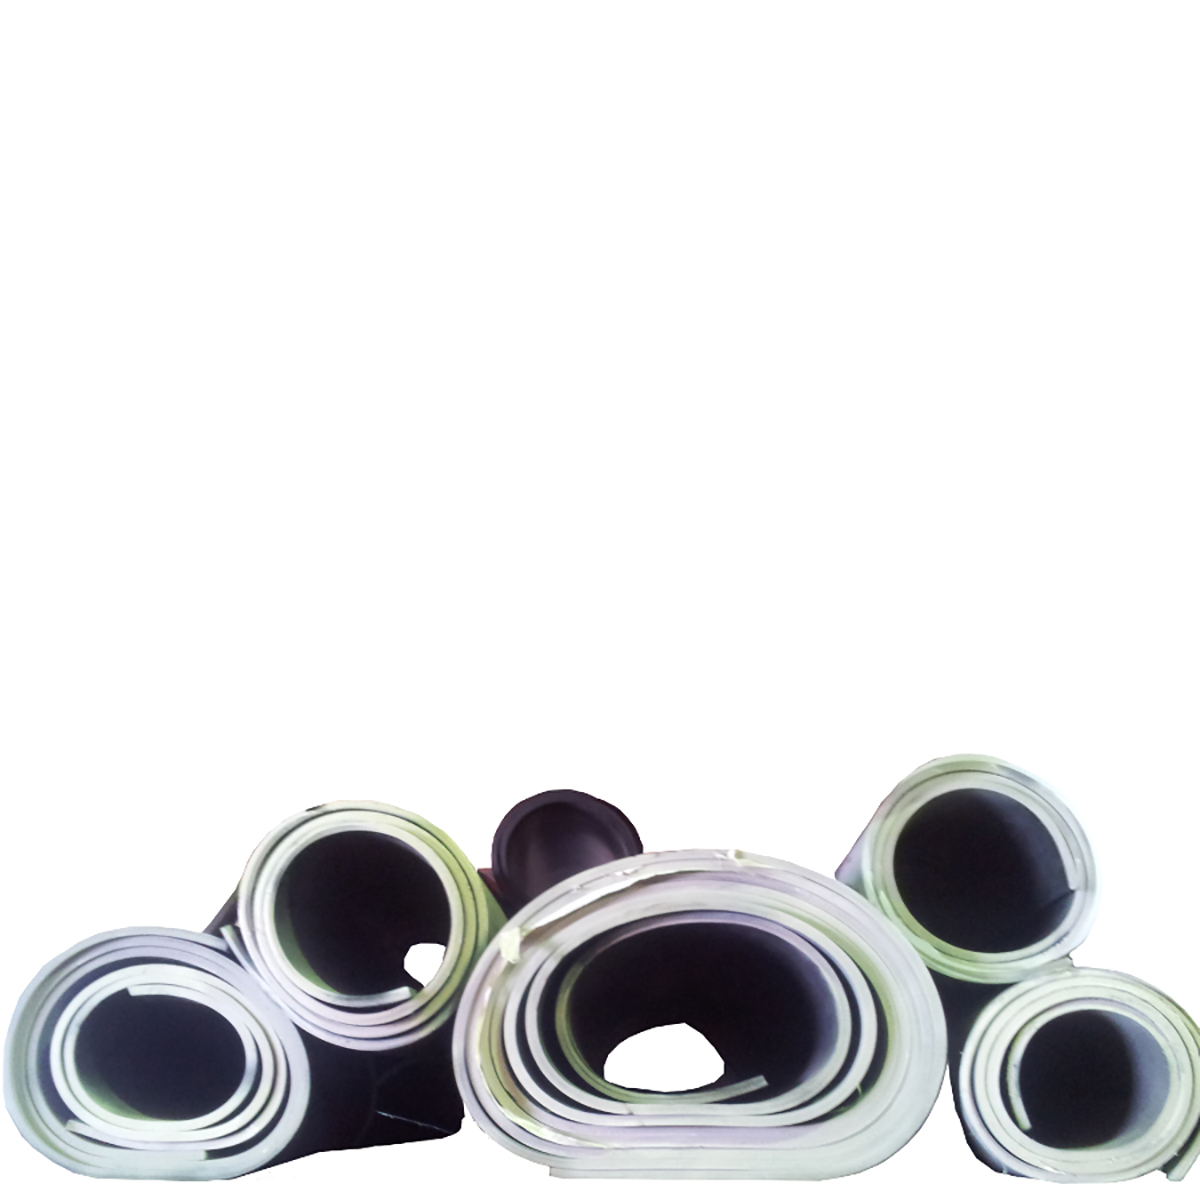 Natural Rubber Insertion Rolls